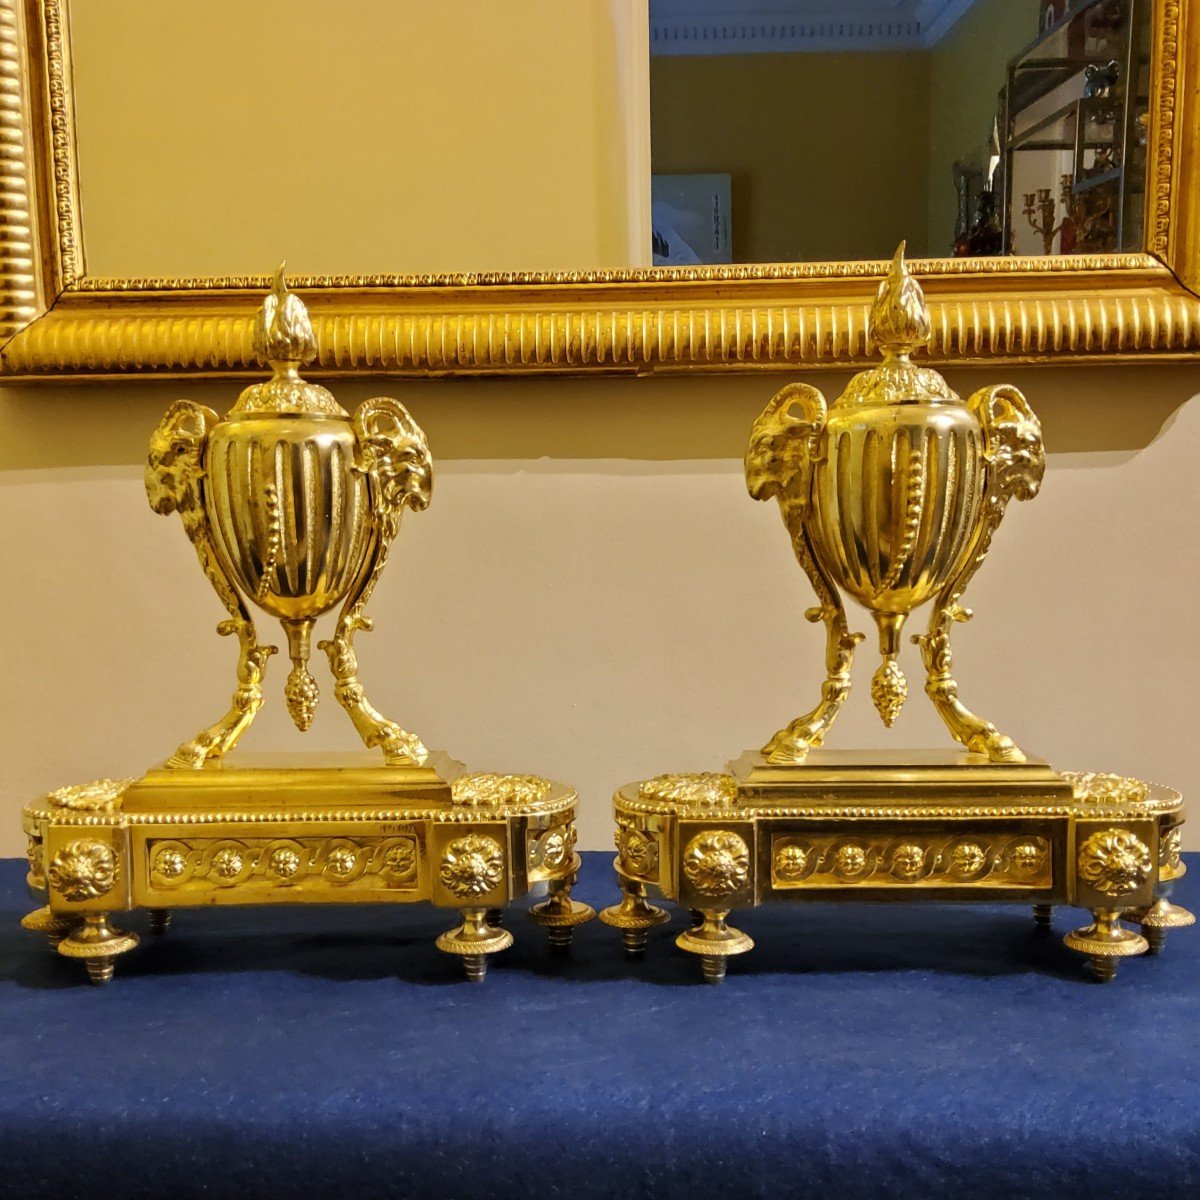 Pair Of Andirons In Louis XVI Style Gilt Bronzes With Fire Pots And Rams 19th Century _beurdeley-photo-2